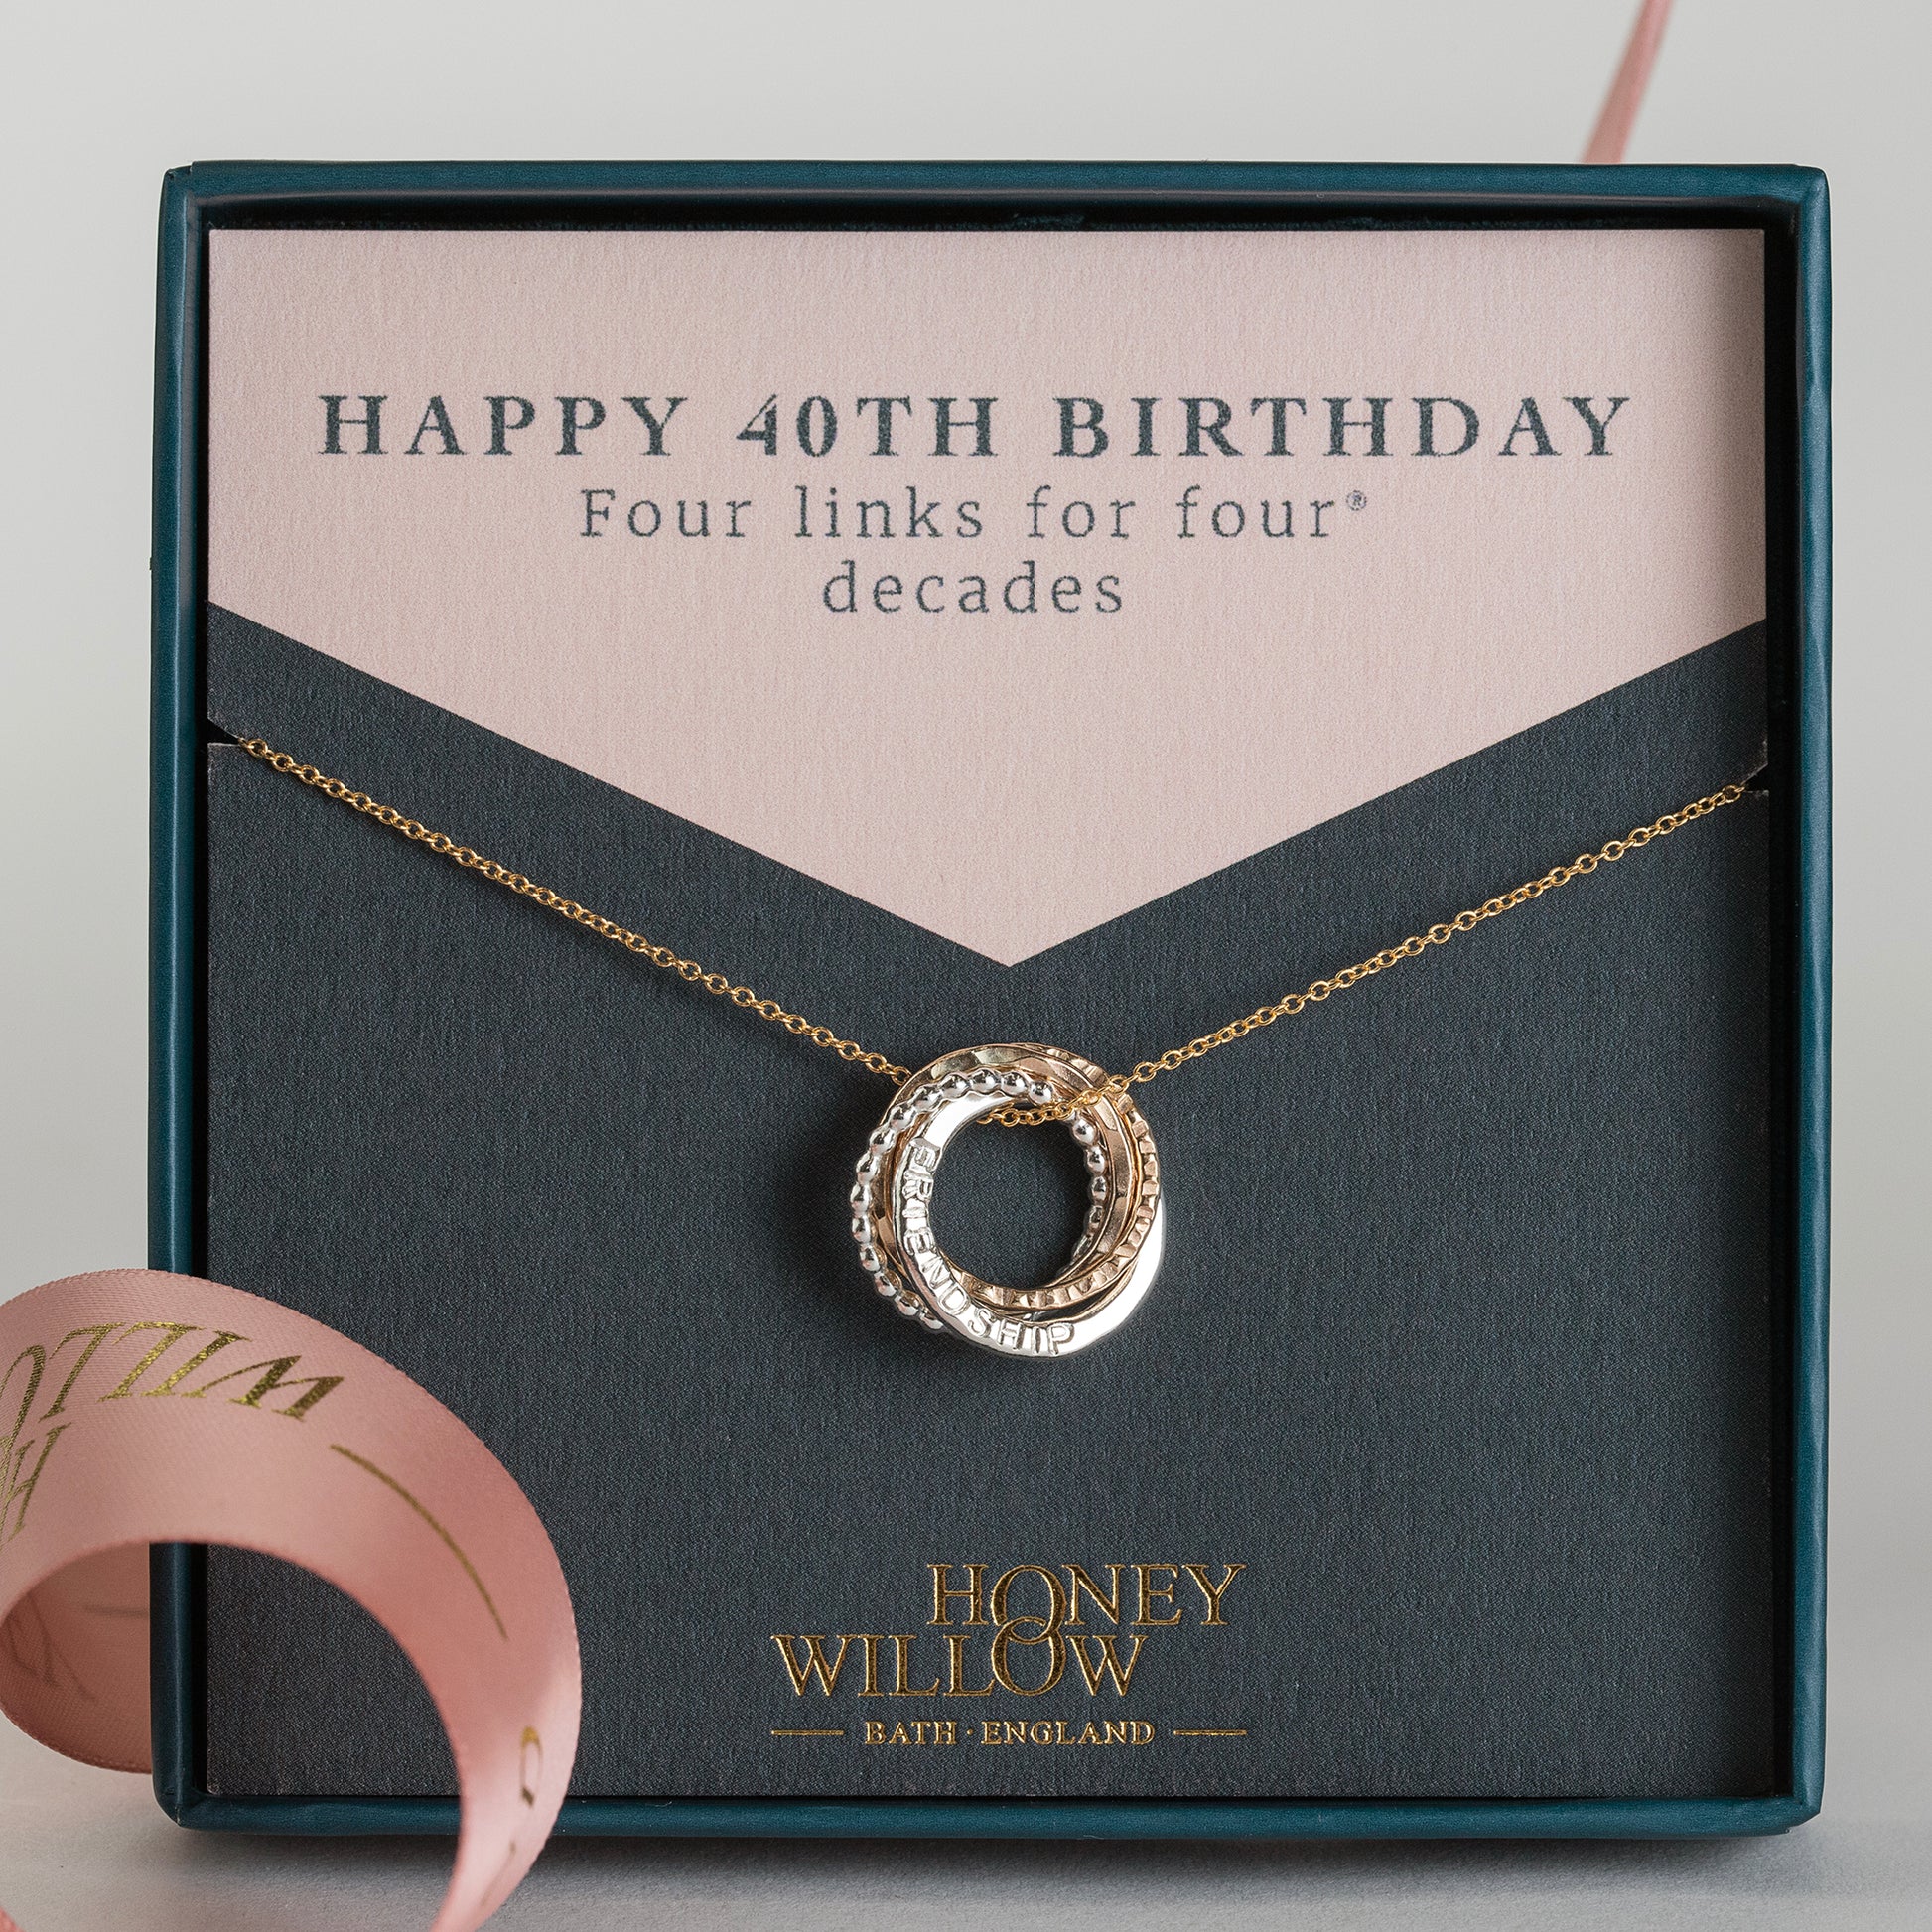 Personalised 40th Birthday Necklace - The Original 4 Links for 4 Decades Necklace - Petite Silver & Gold